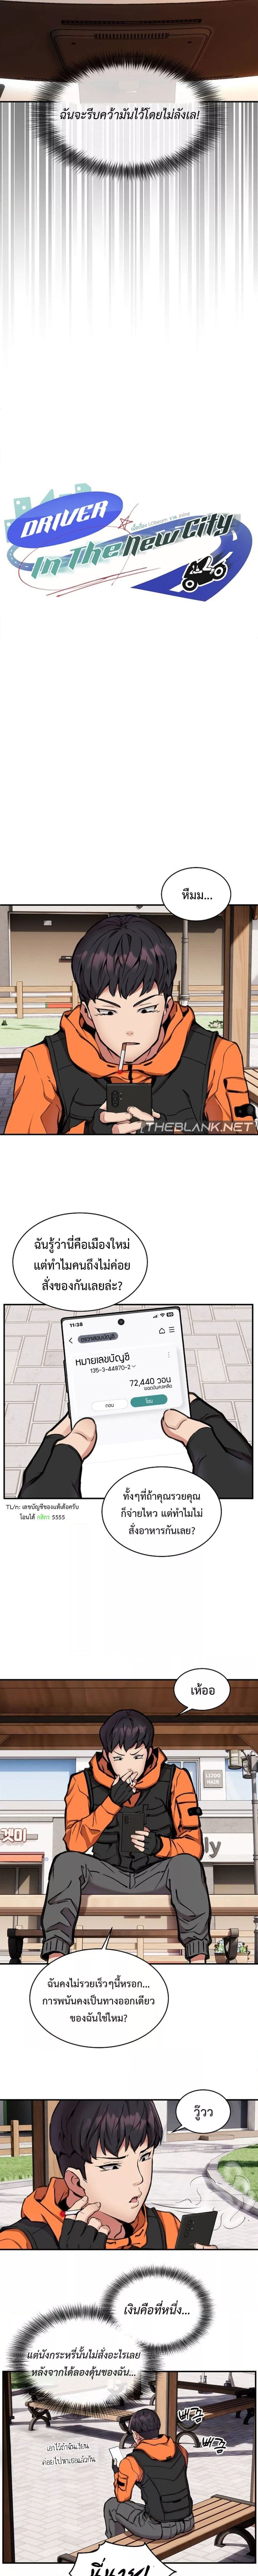 Driver in the New City ตอนที่ 7 ภาพ 4